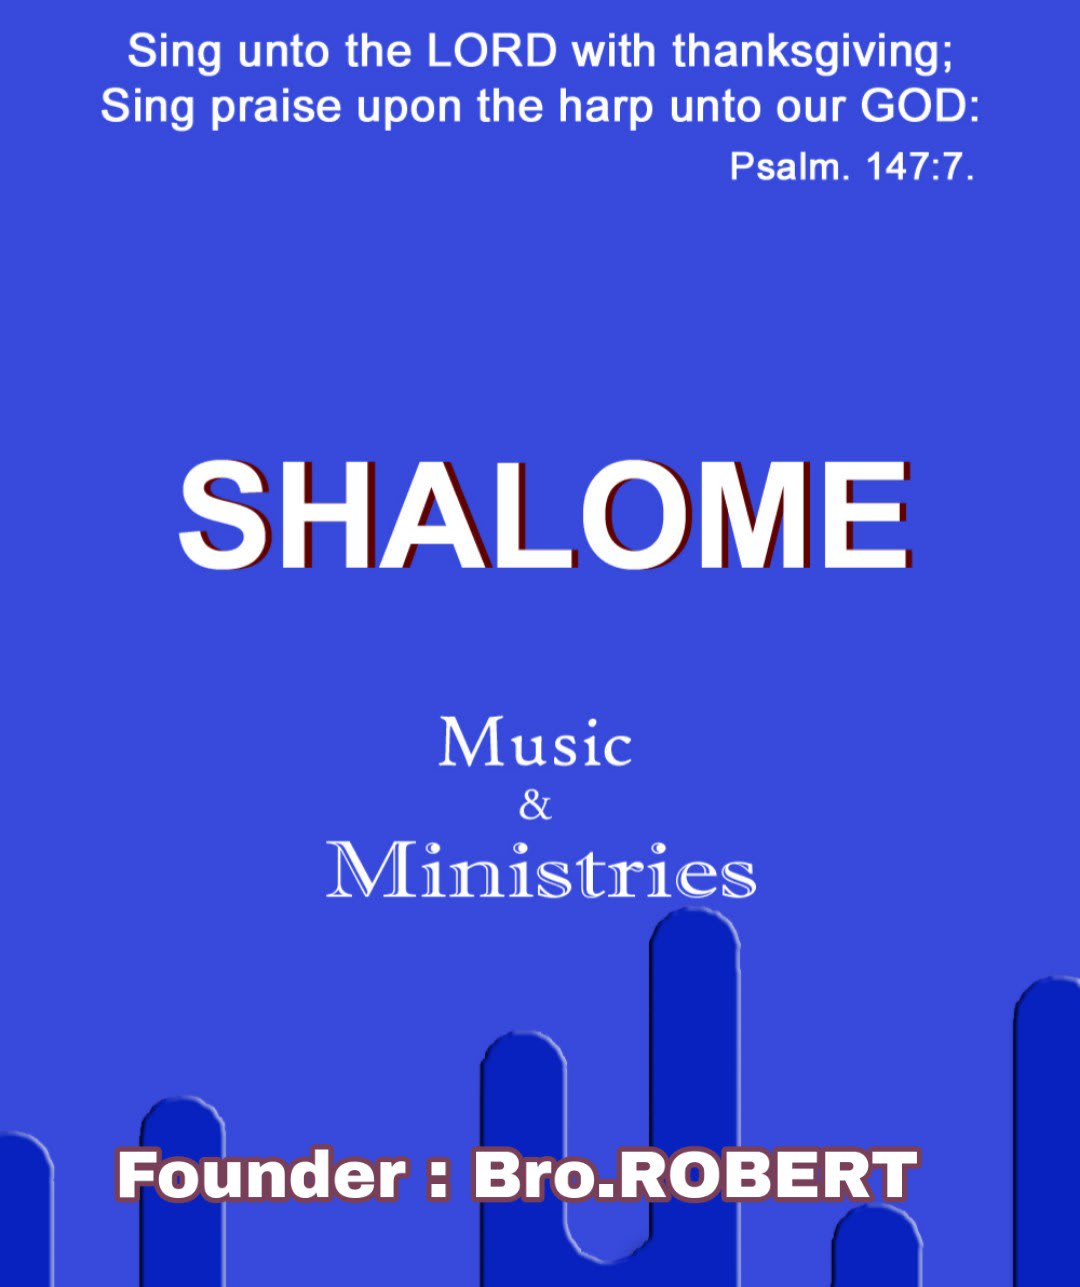 Shalome Music & Ministries